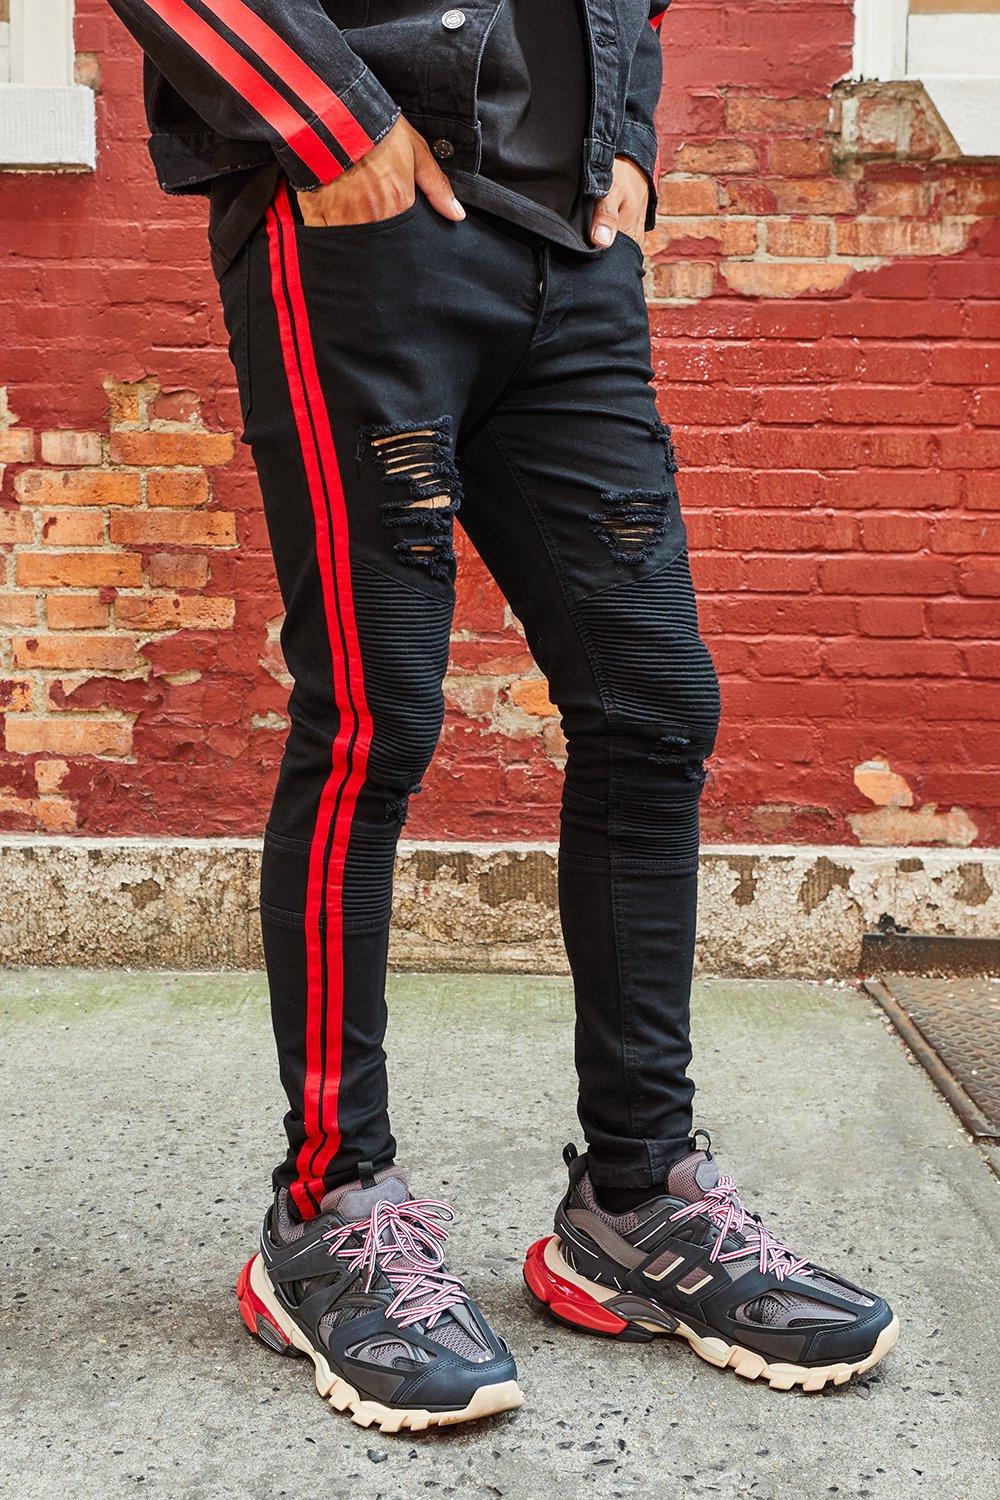 red & black jeans